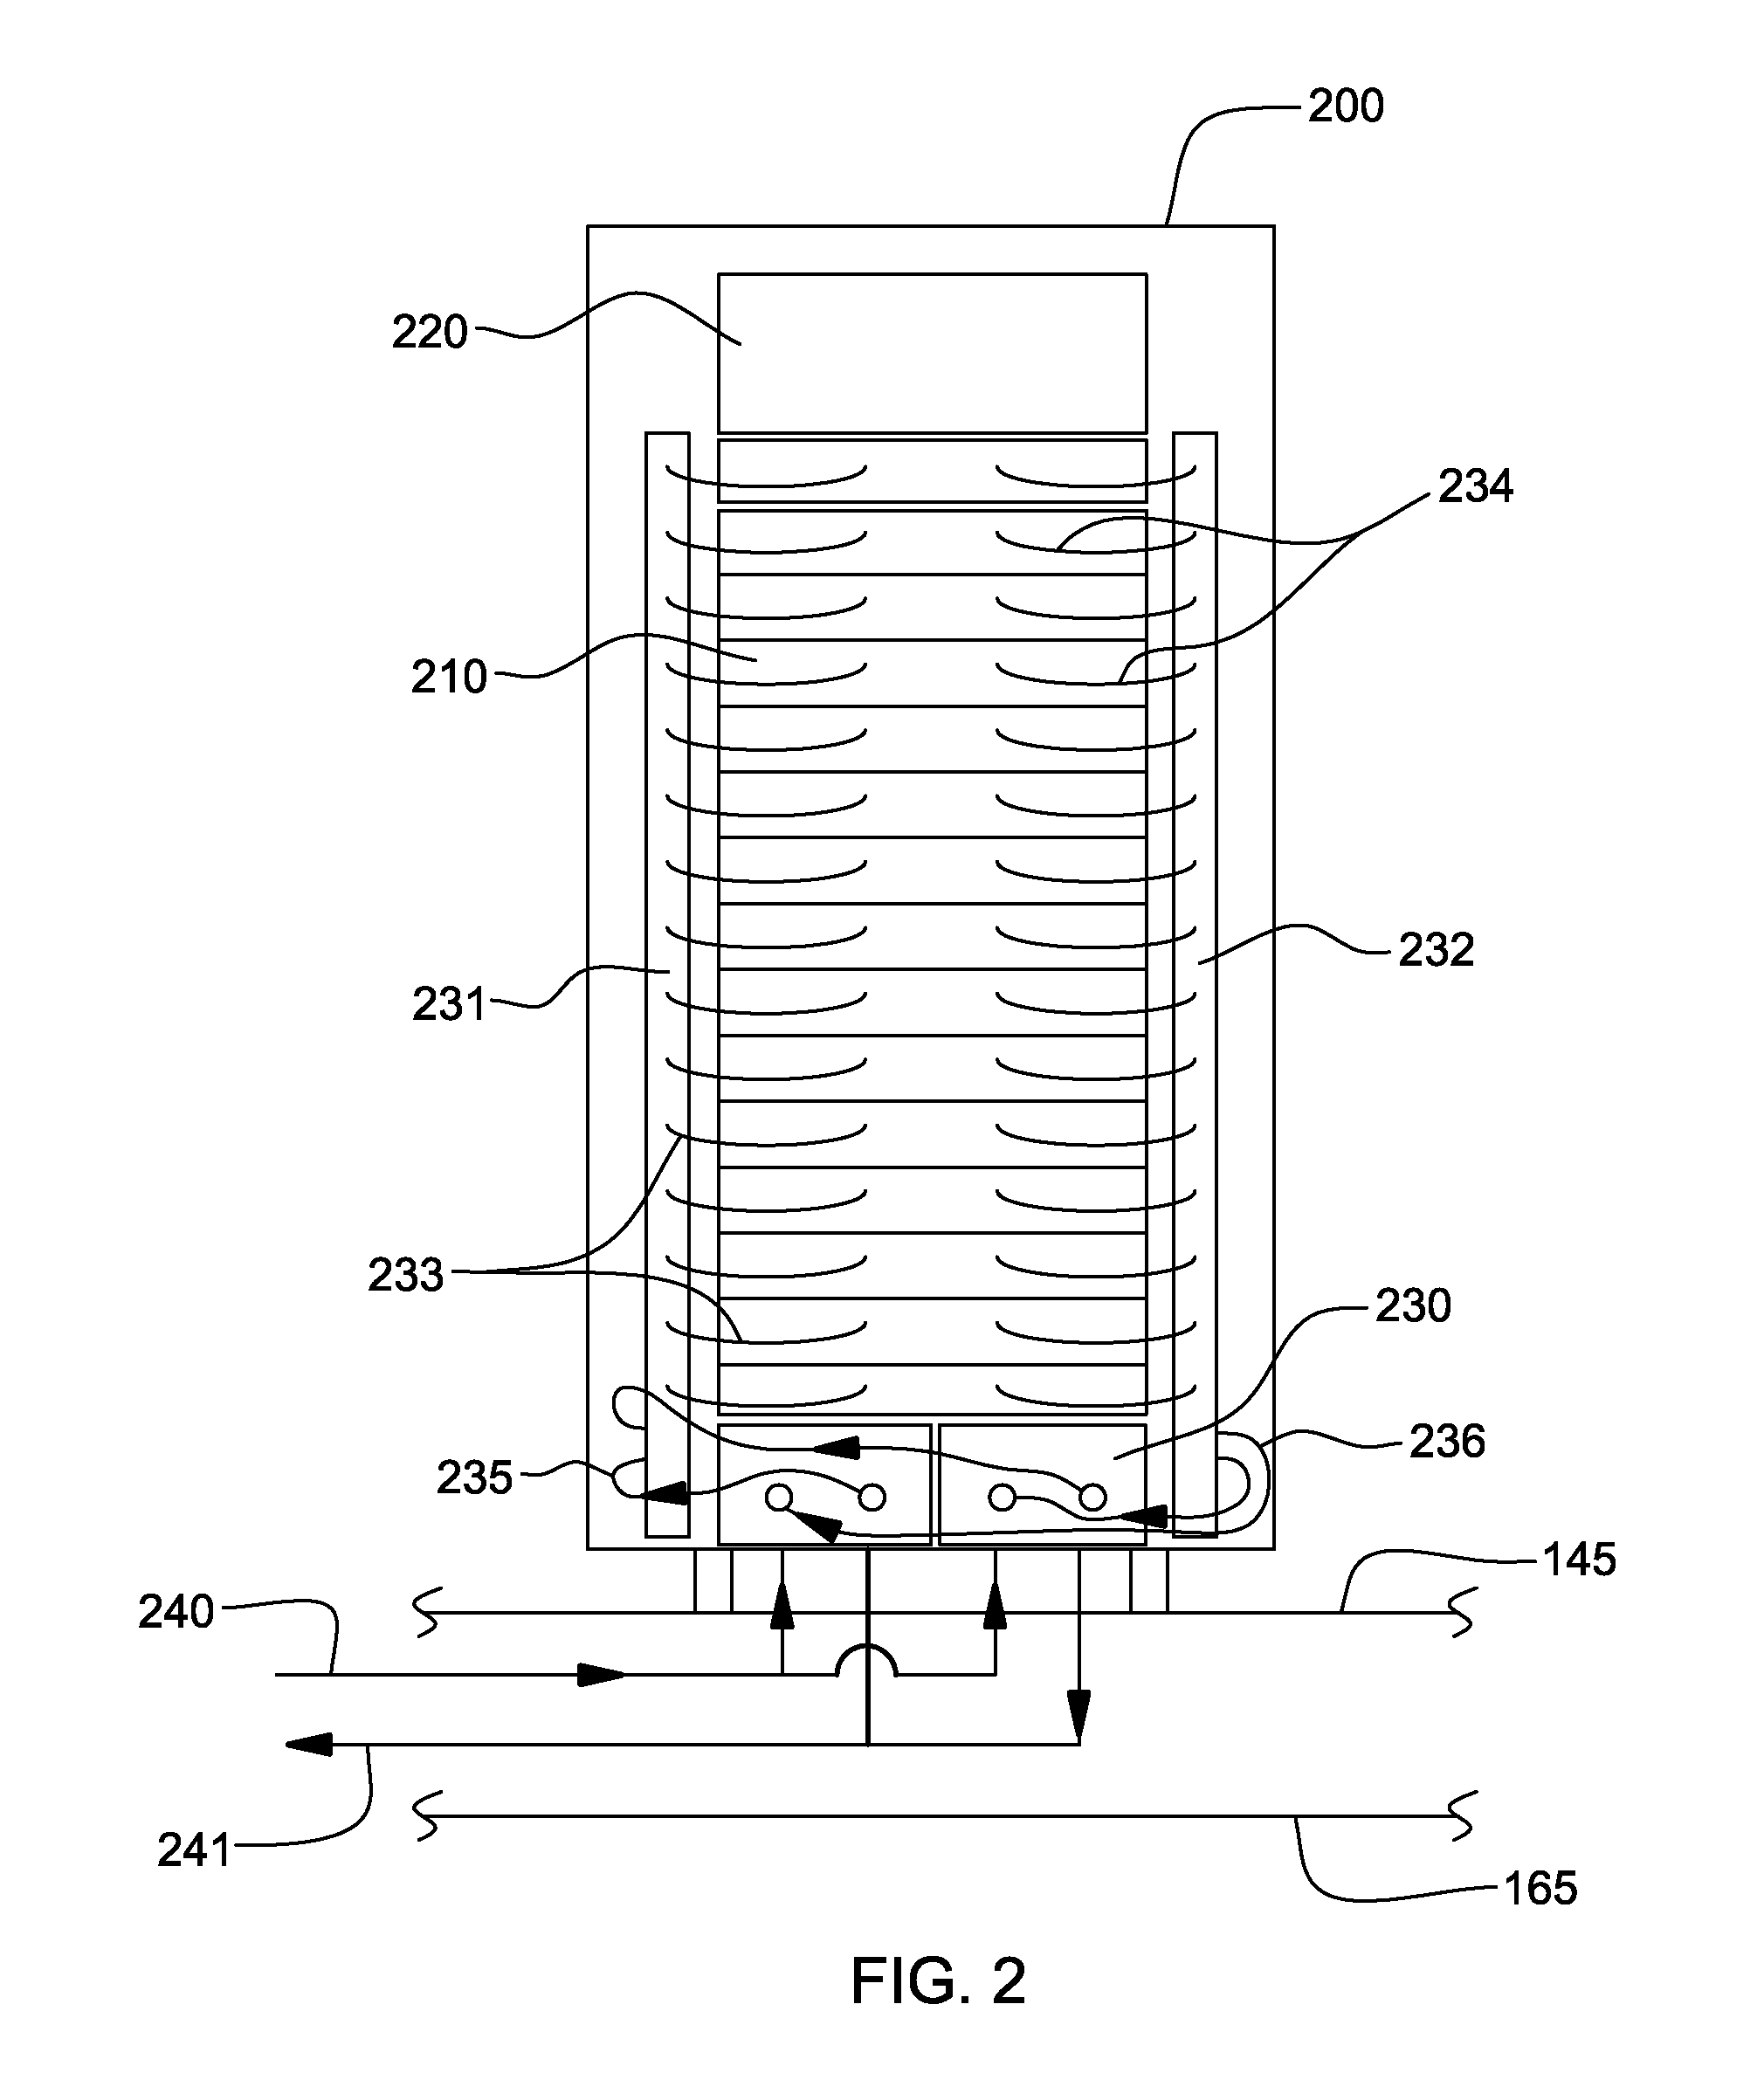 Interleaved, immersion-cooling apparatuses and methods for cooling electronic subsystems